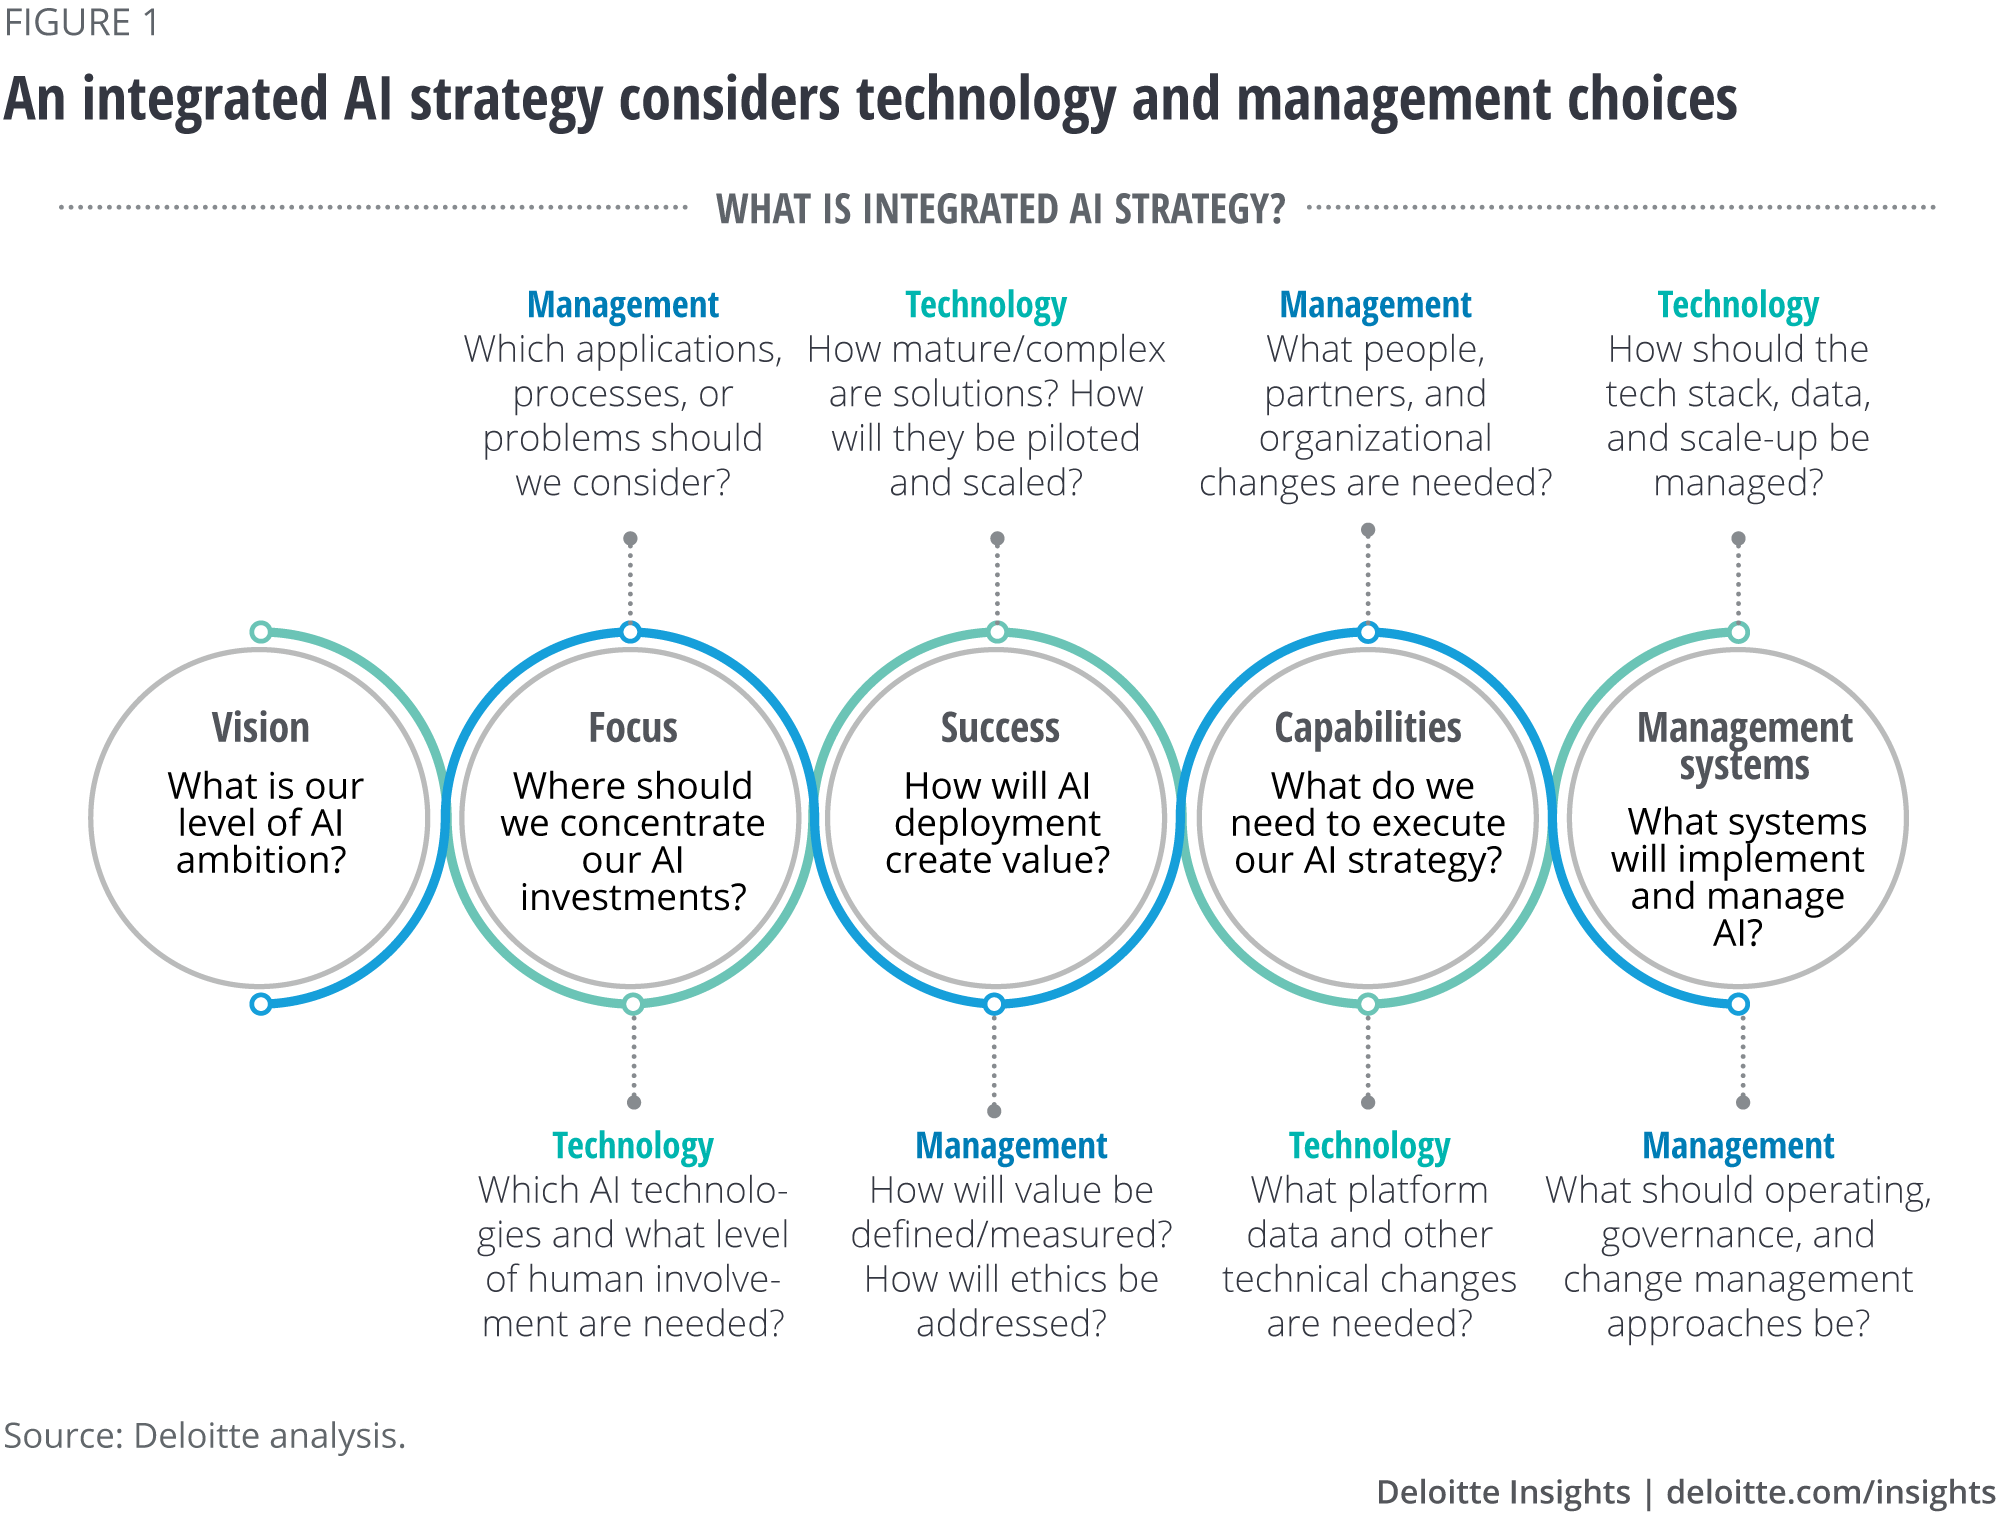 An integrated AI strategy considers technology and management choices